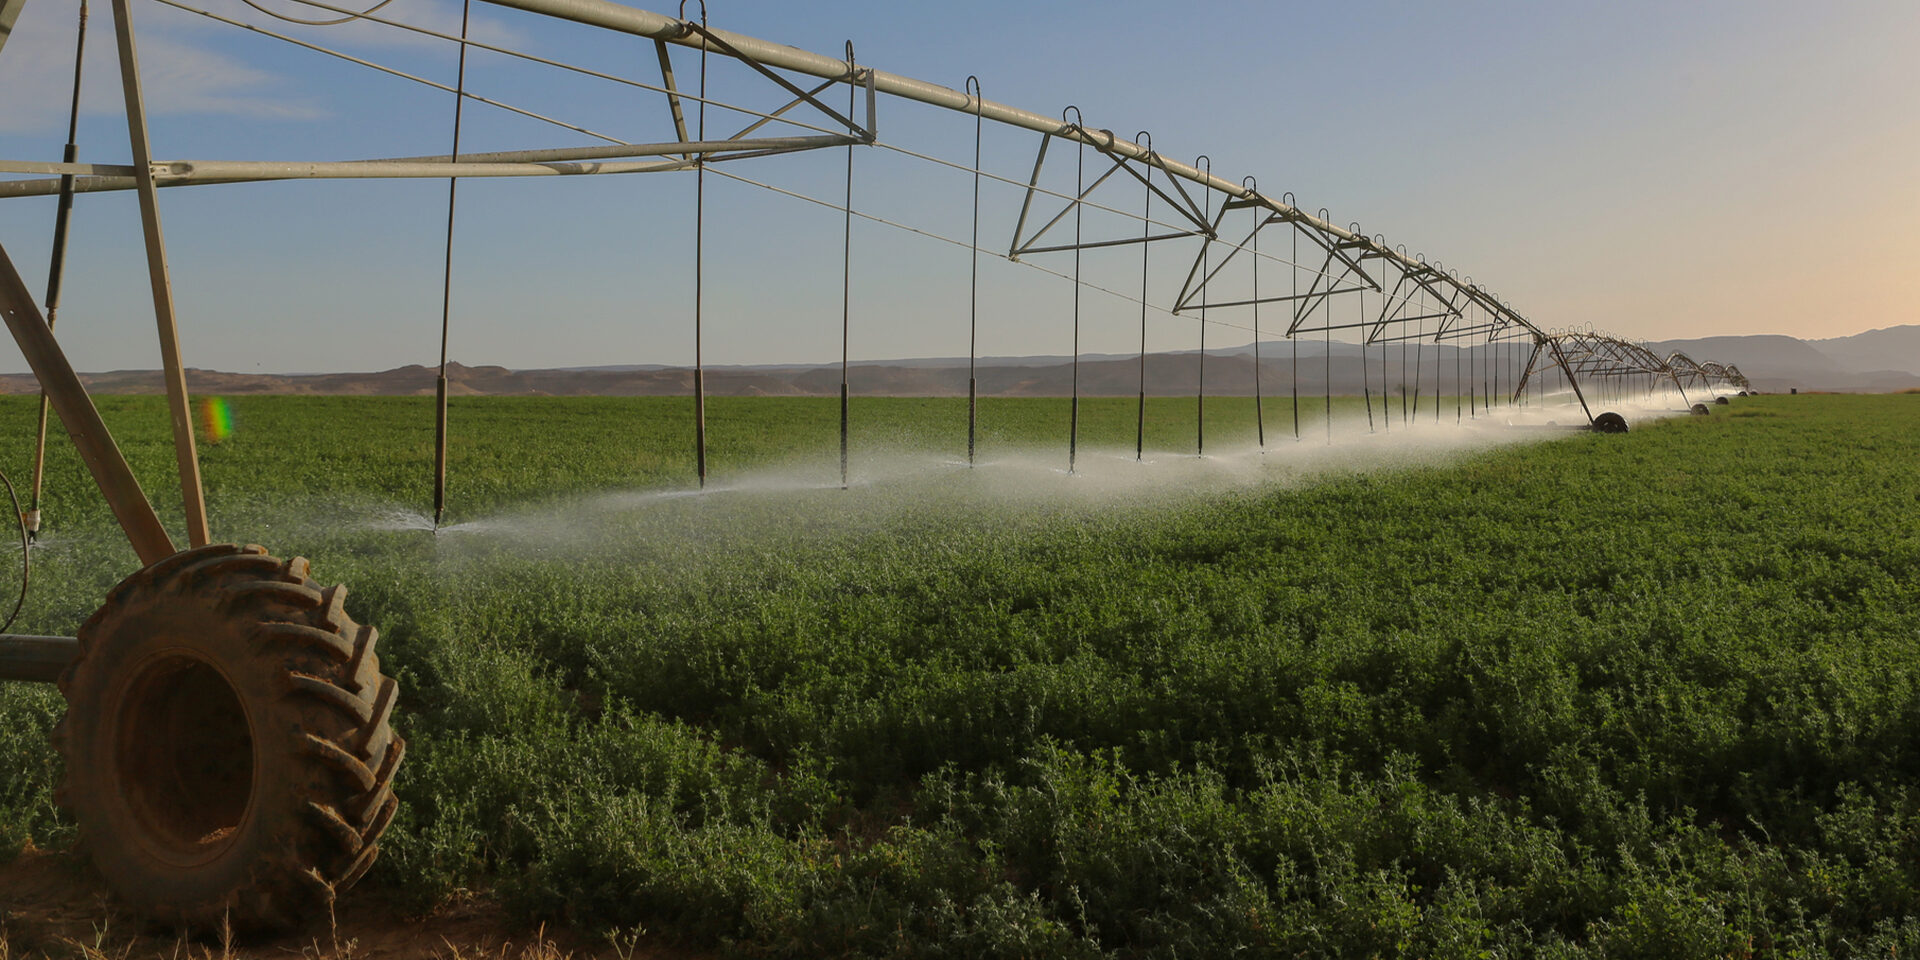 A large irrigation system sprinkling water on a swath of farmland.